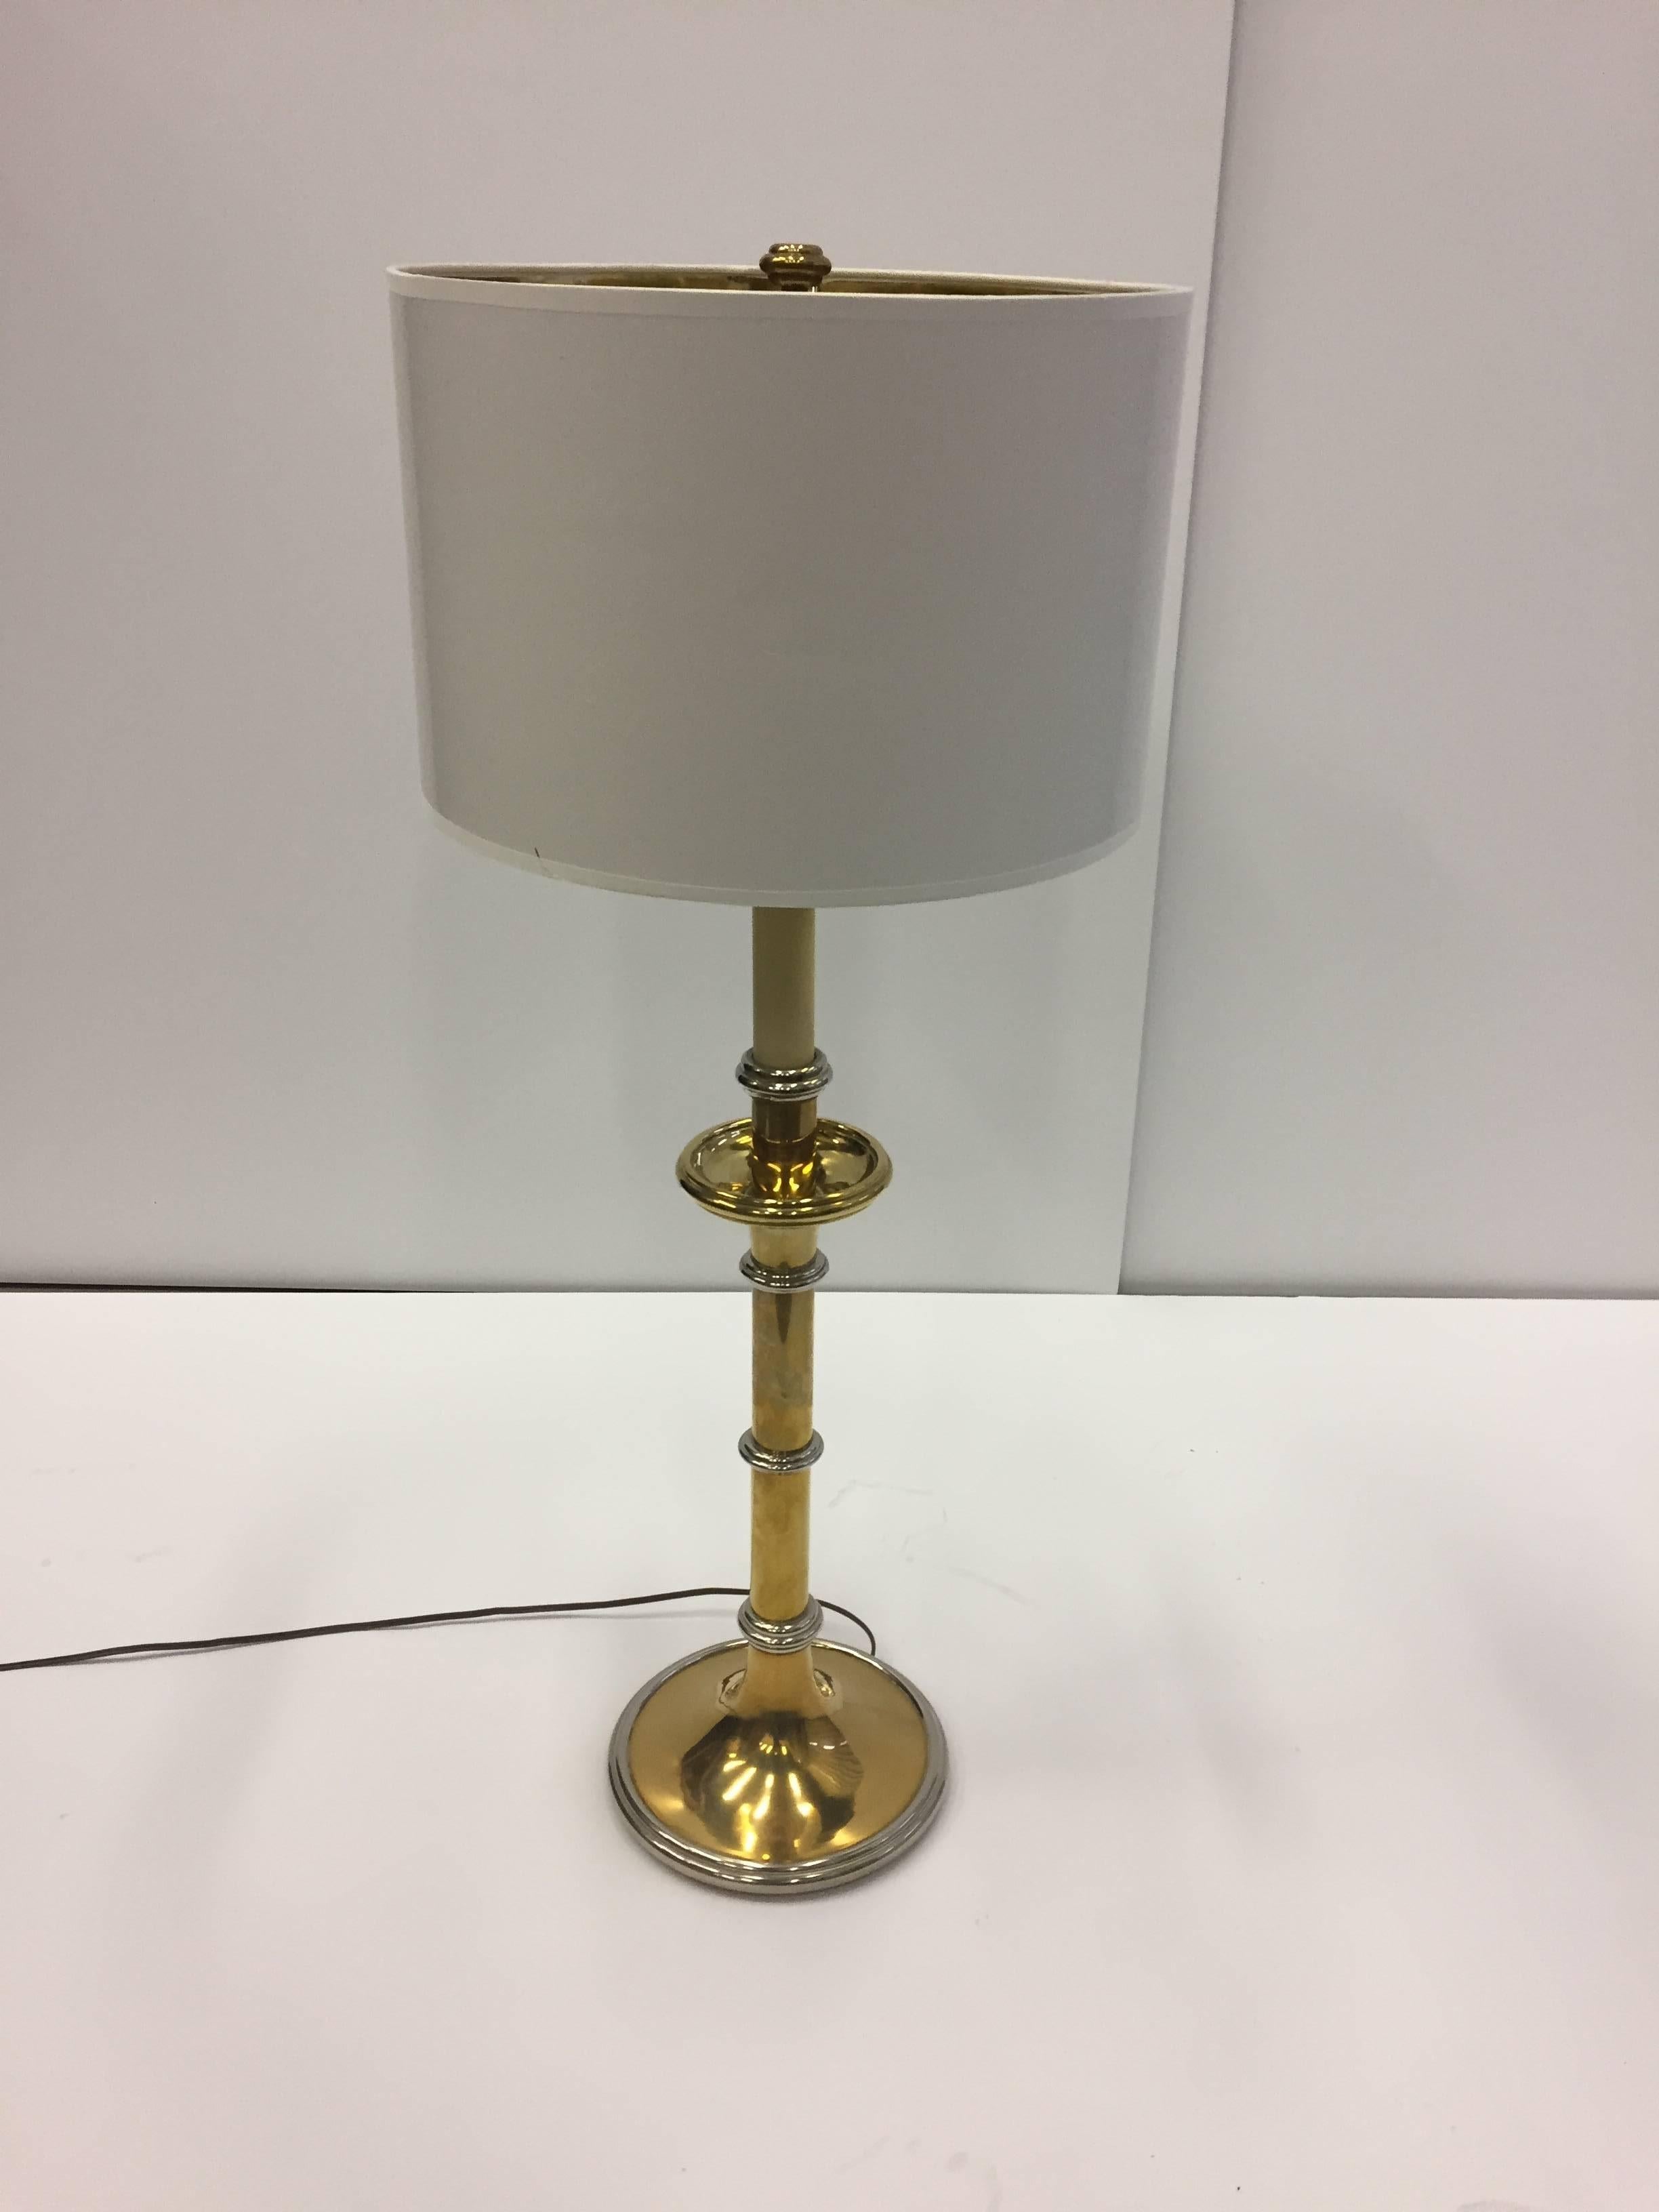 Elegant and high quality glamorous table lamps having brass candlestick style shape with chrome details, custom shades with gold metal lining, 60 watt each.
31.5 to top of socket.